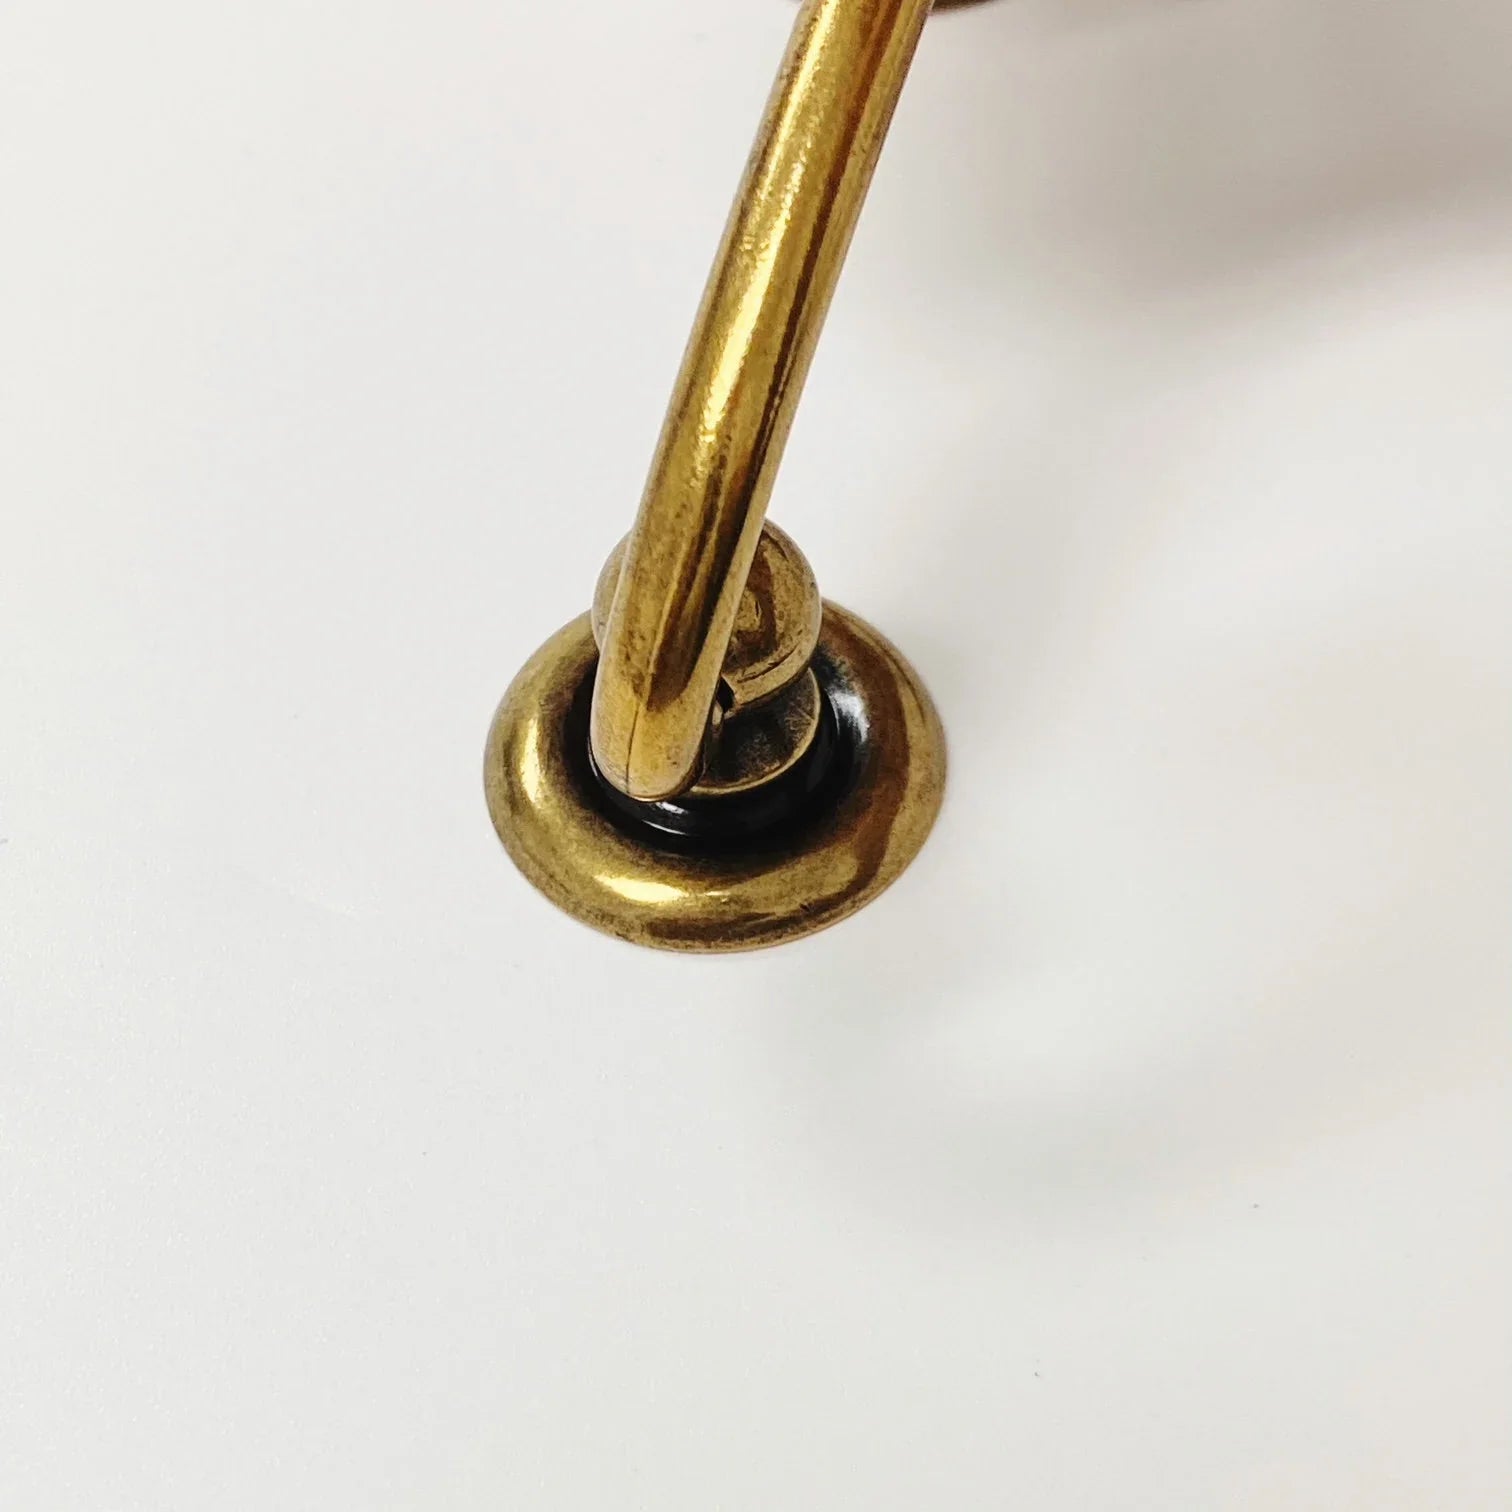 Brass Ring Pulls "Oval" Hardware Cabinet Pull Drawer Pull - Industry Hardware